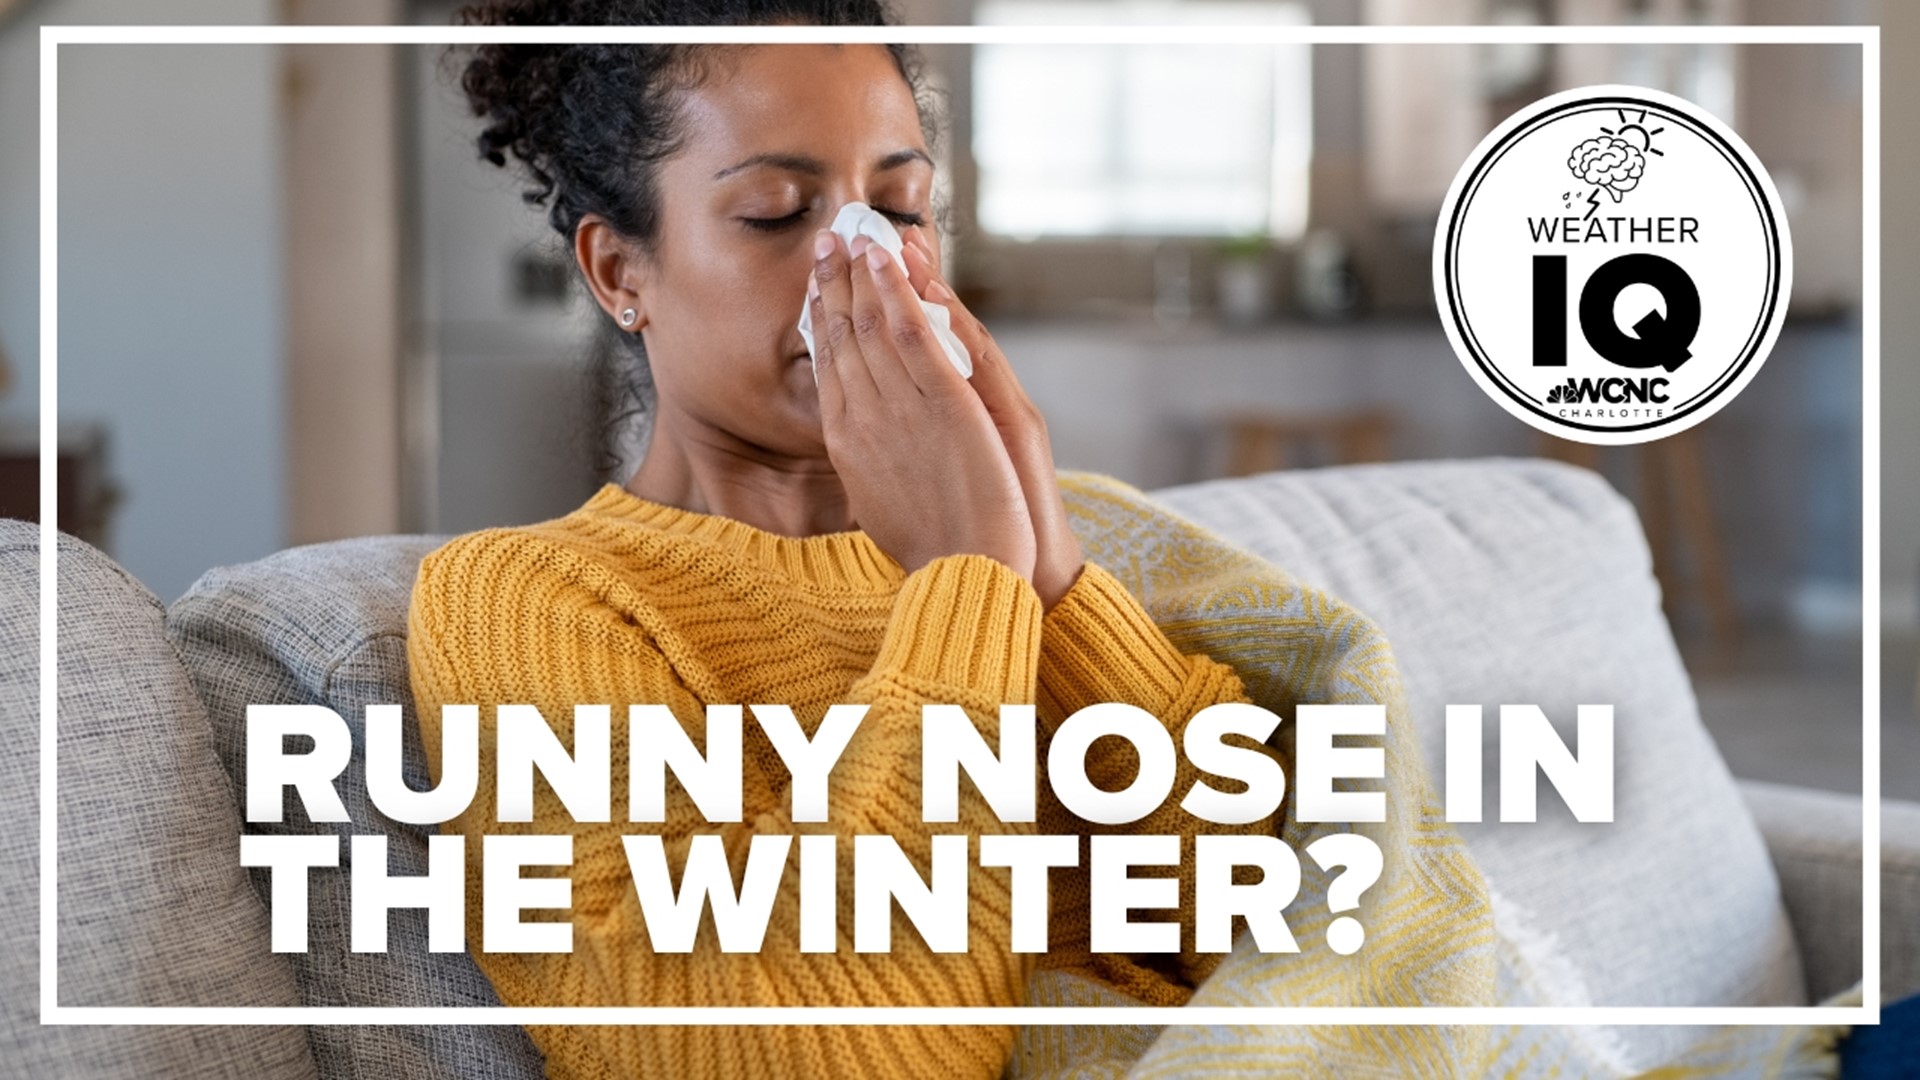 Breathing in cold air causes nasal congestion and a runny nose.